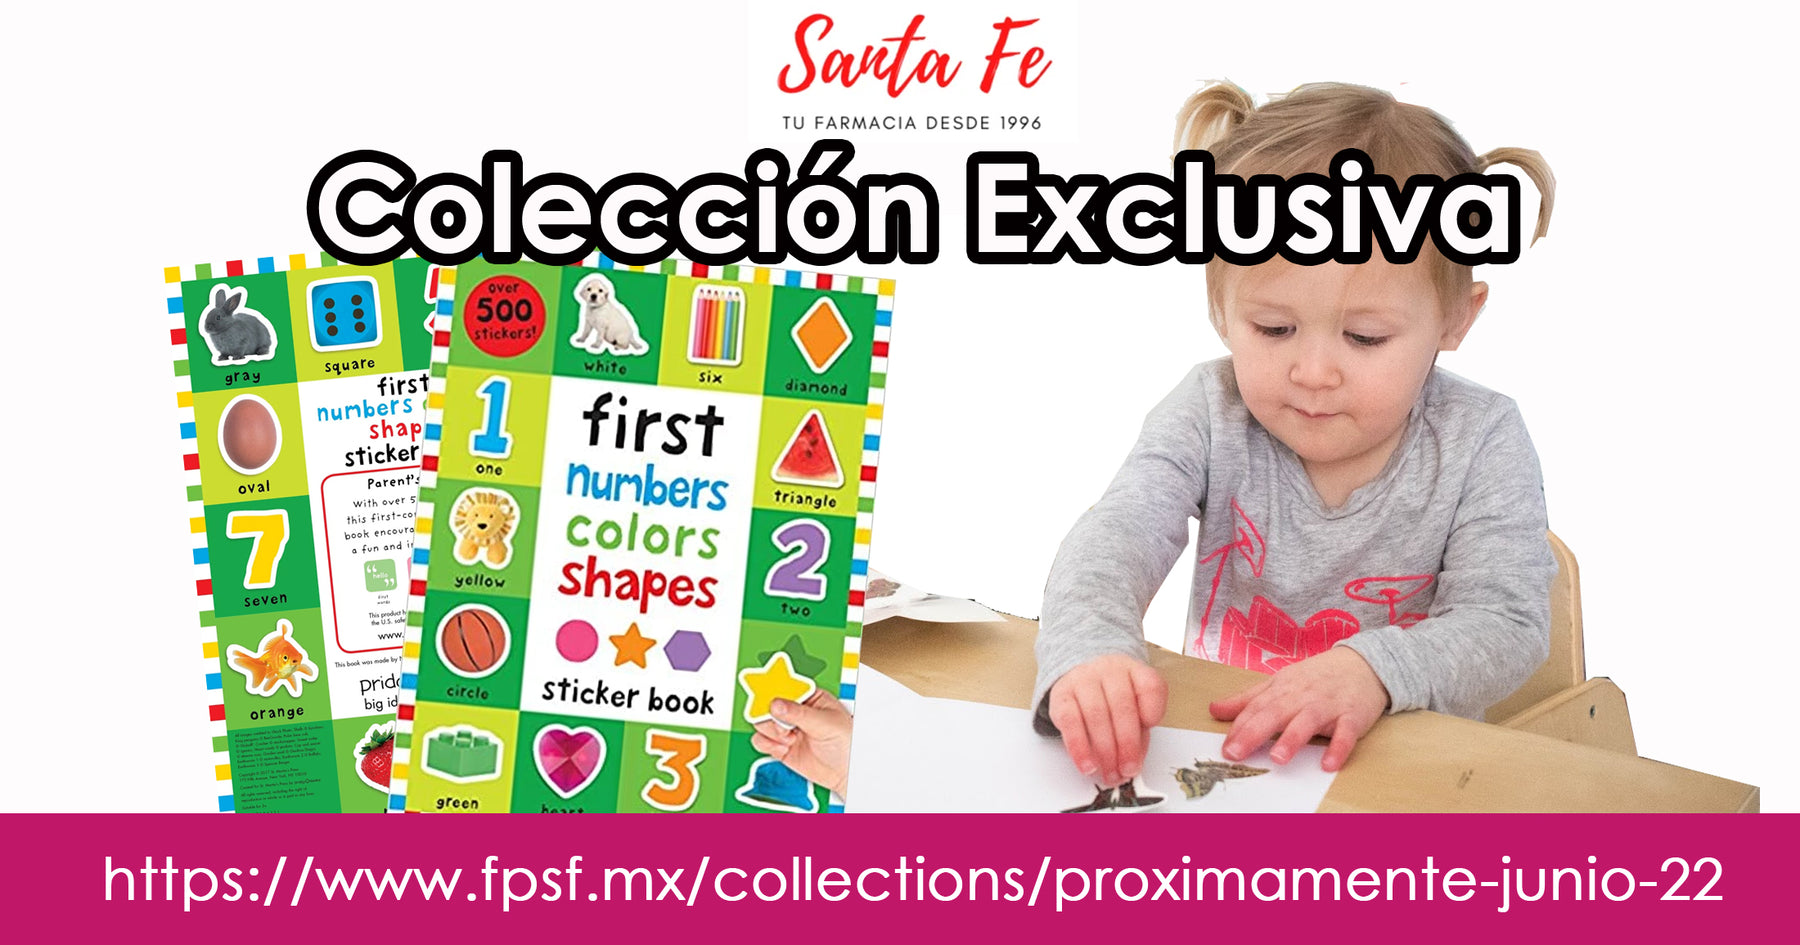 Colección Exclusiva Sticker Book Fist Numbers Colors Shapes